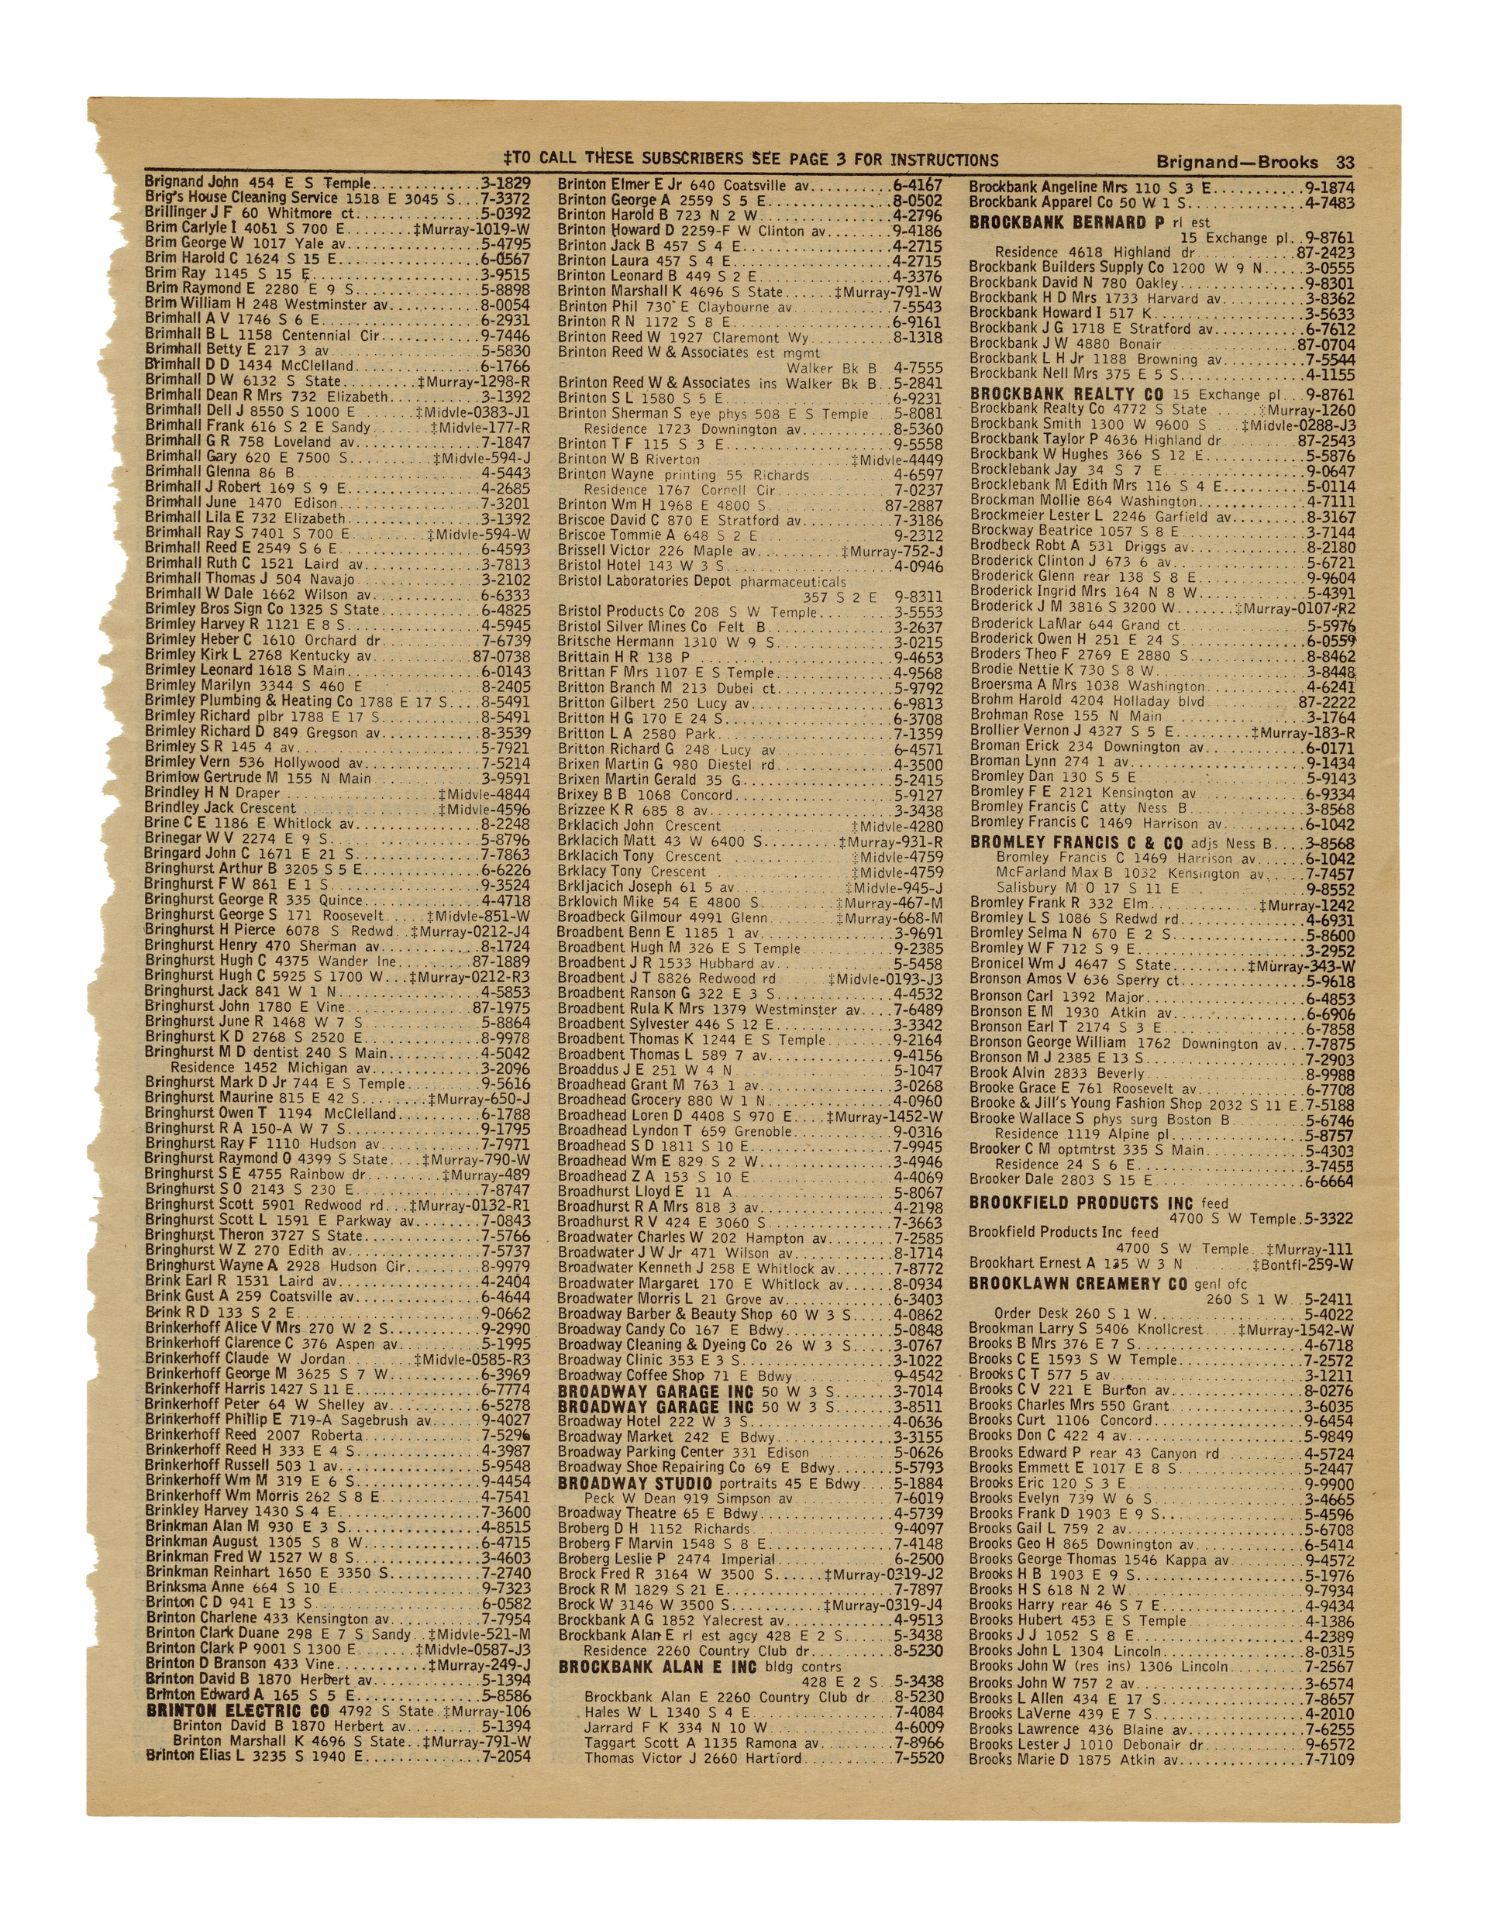 BACK TO THE FUTURE (1985) - Loose Phone Book Page with Dr. Emmett Brown's (Christopher Lloyd) Inform - Image 2 of 2